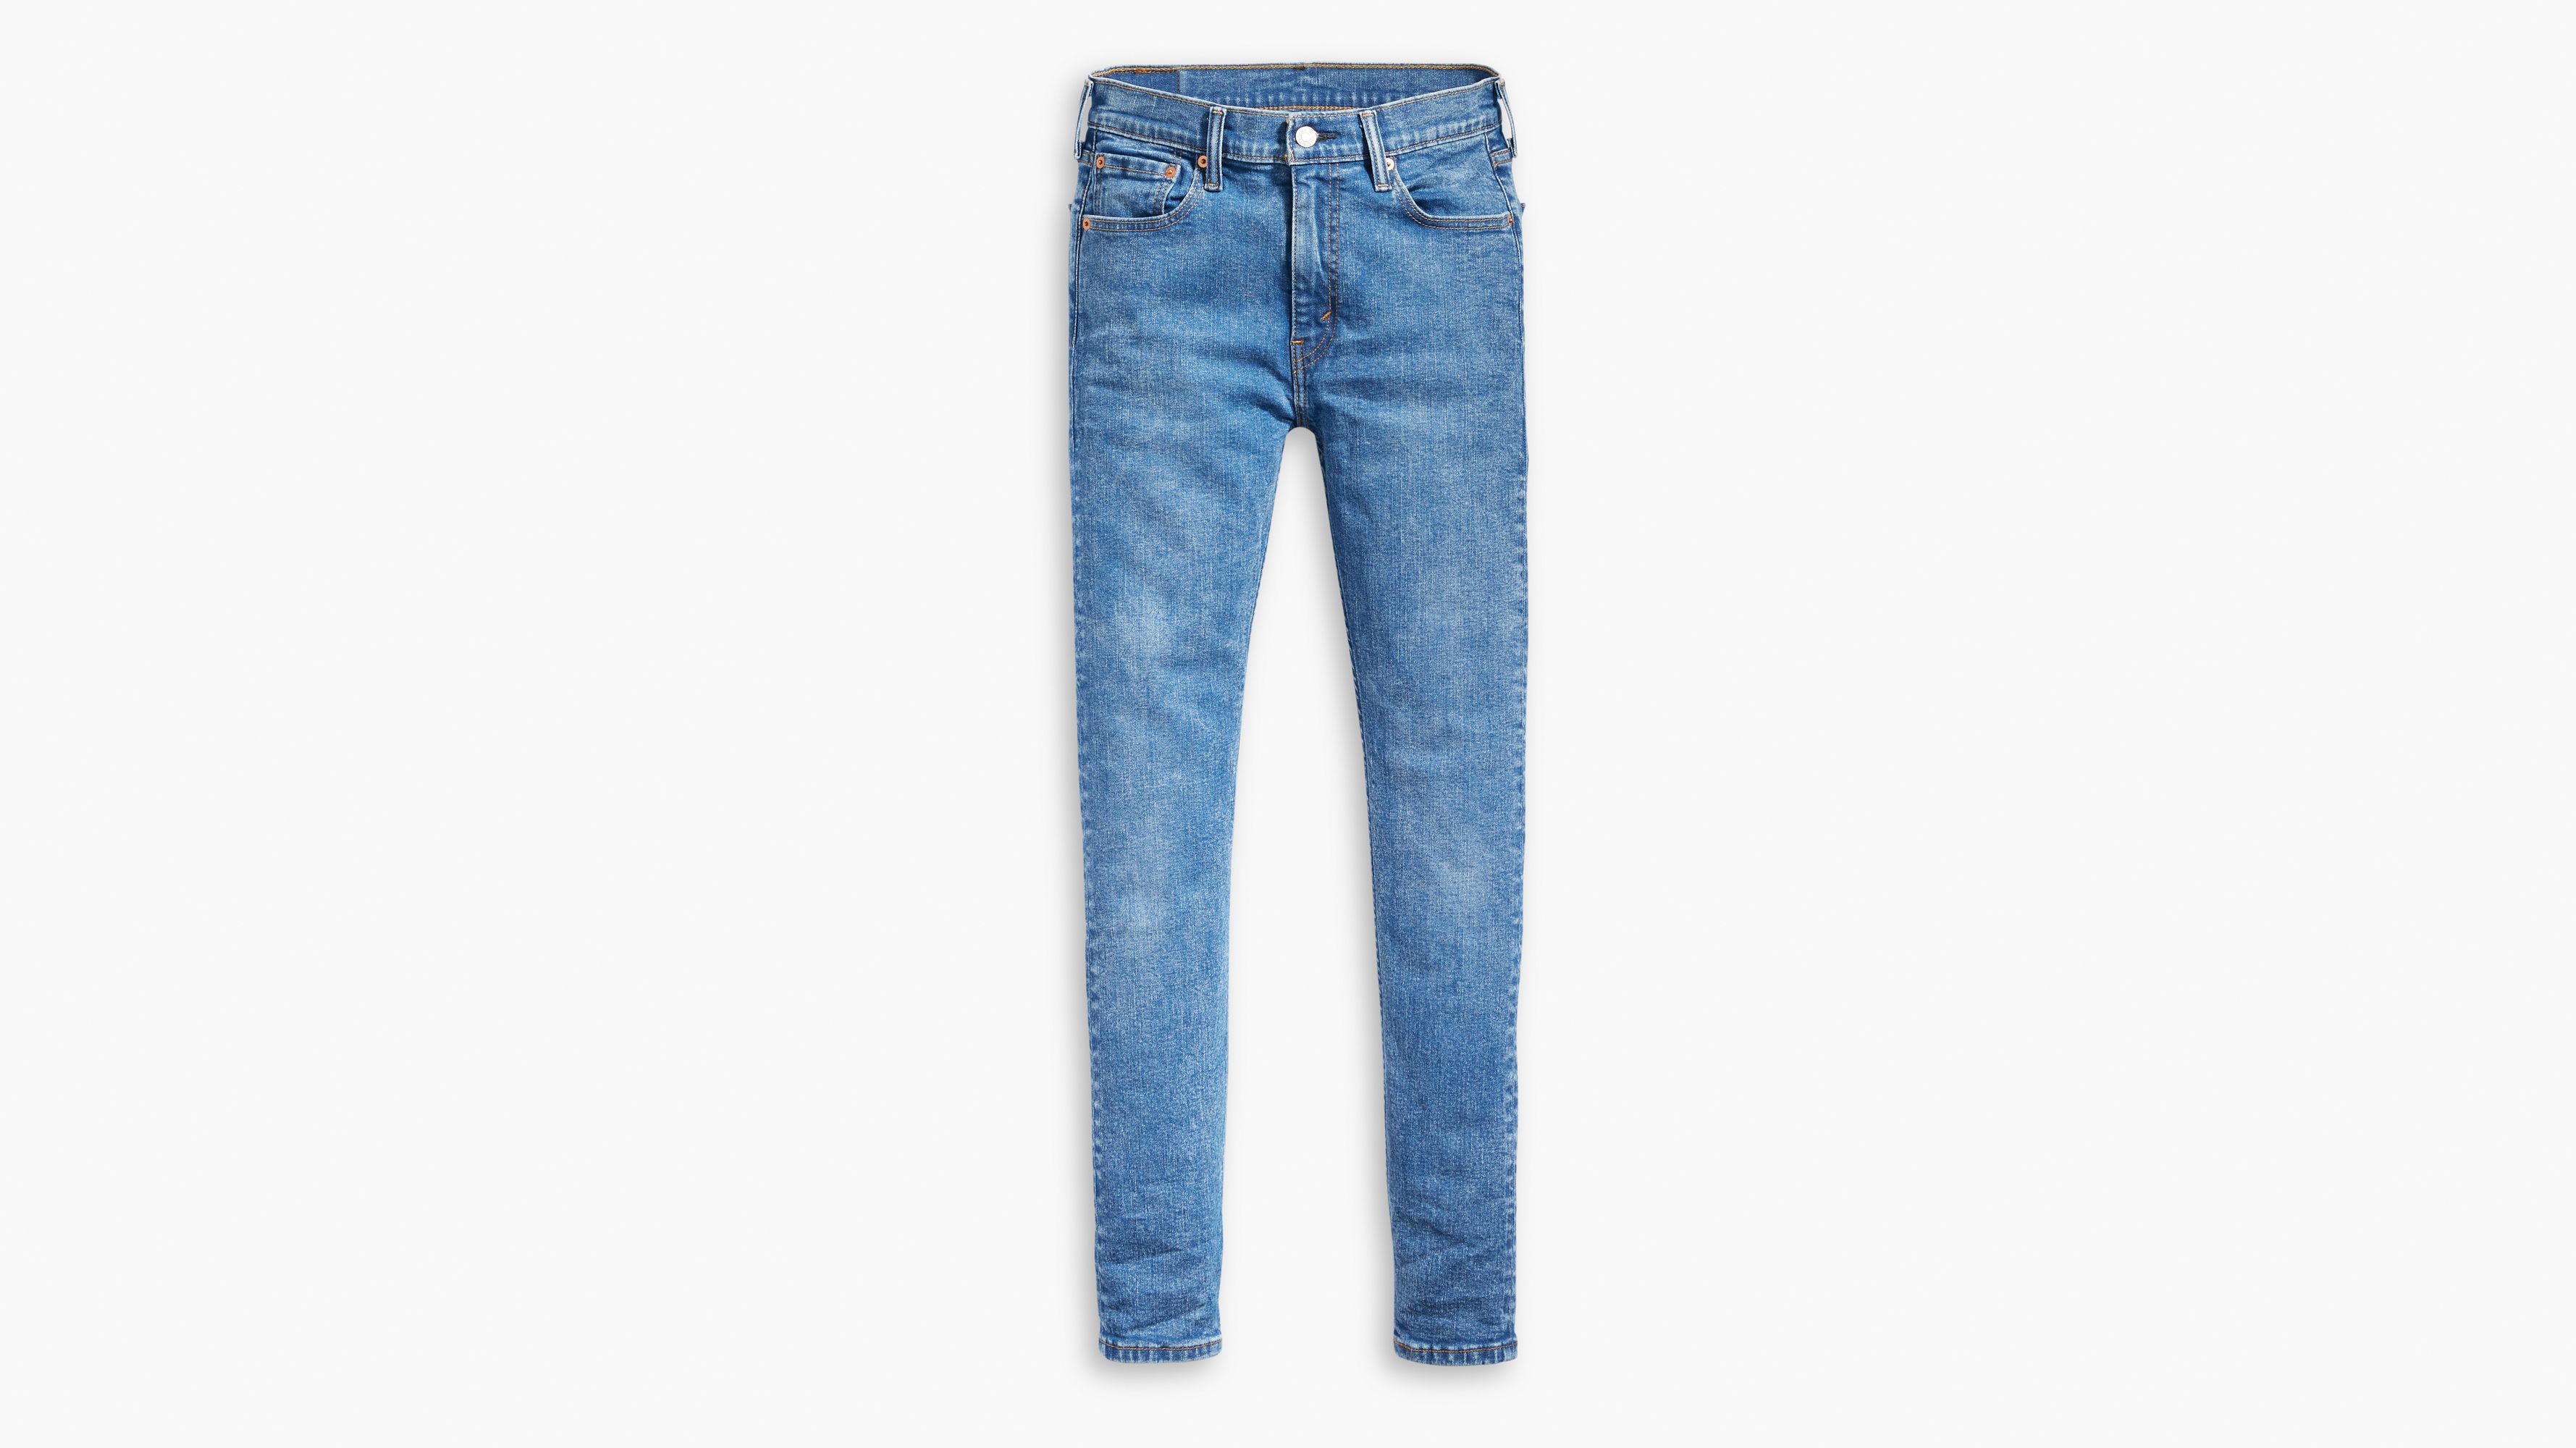 levis tapered jean